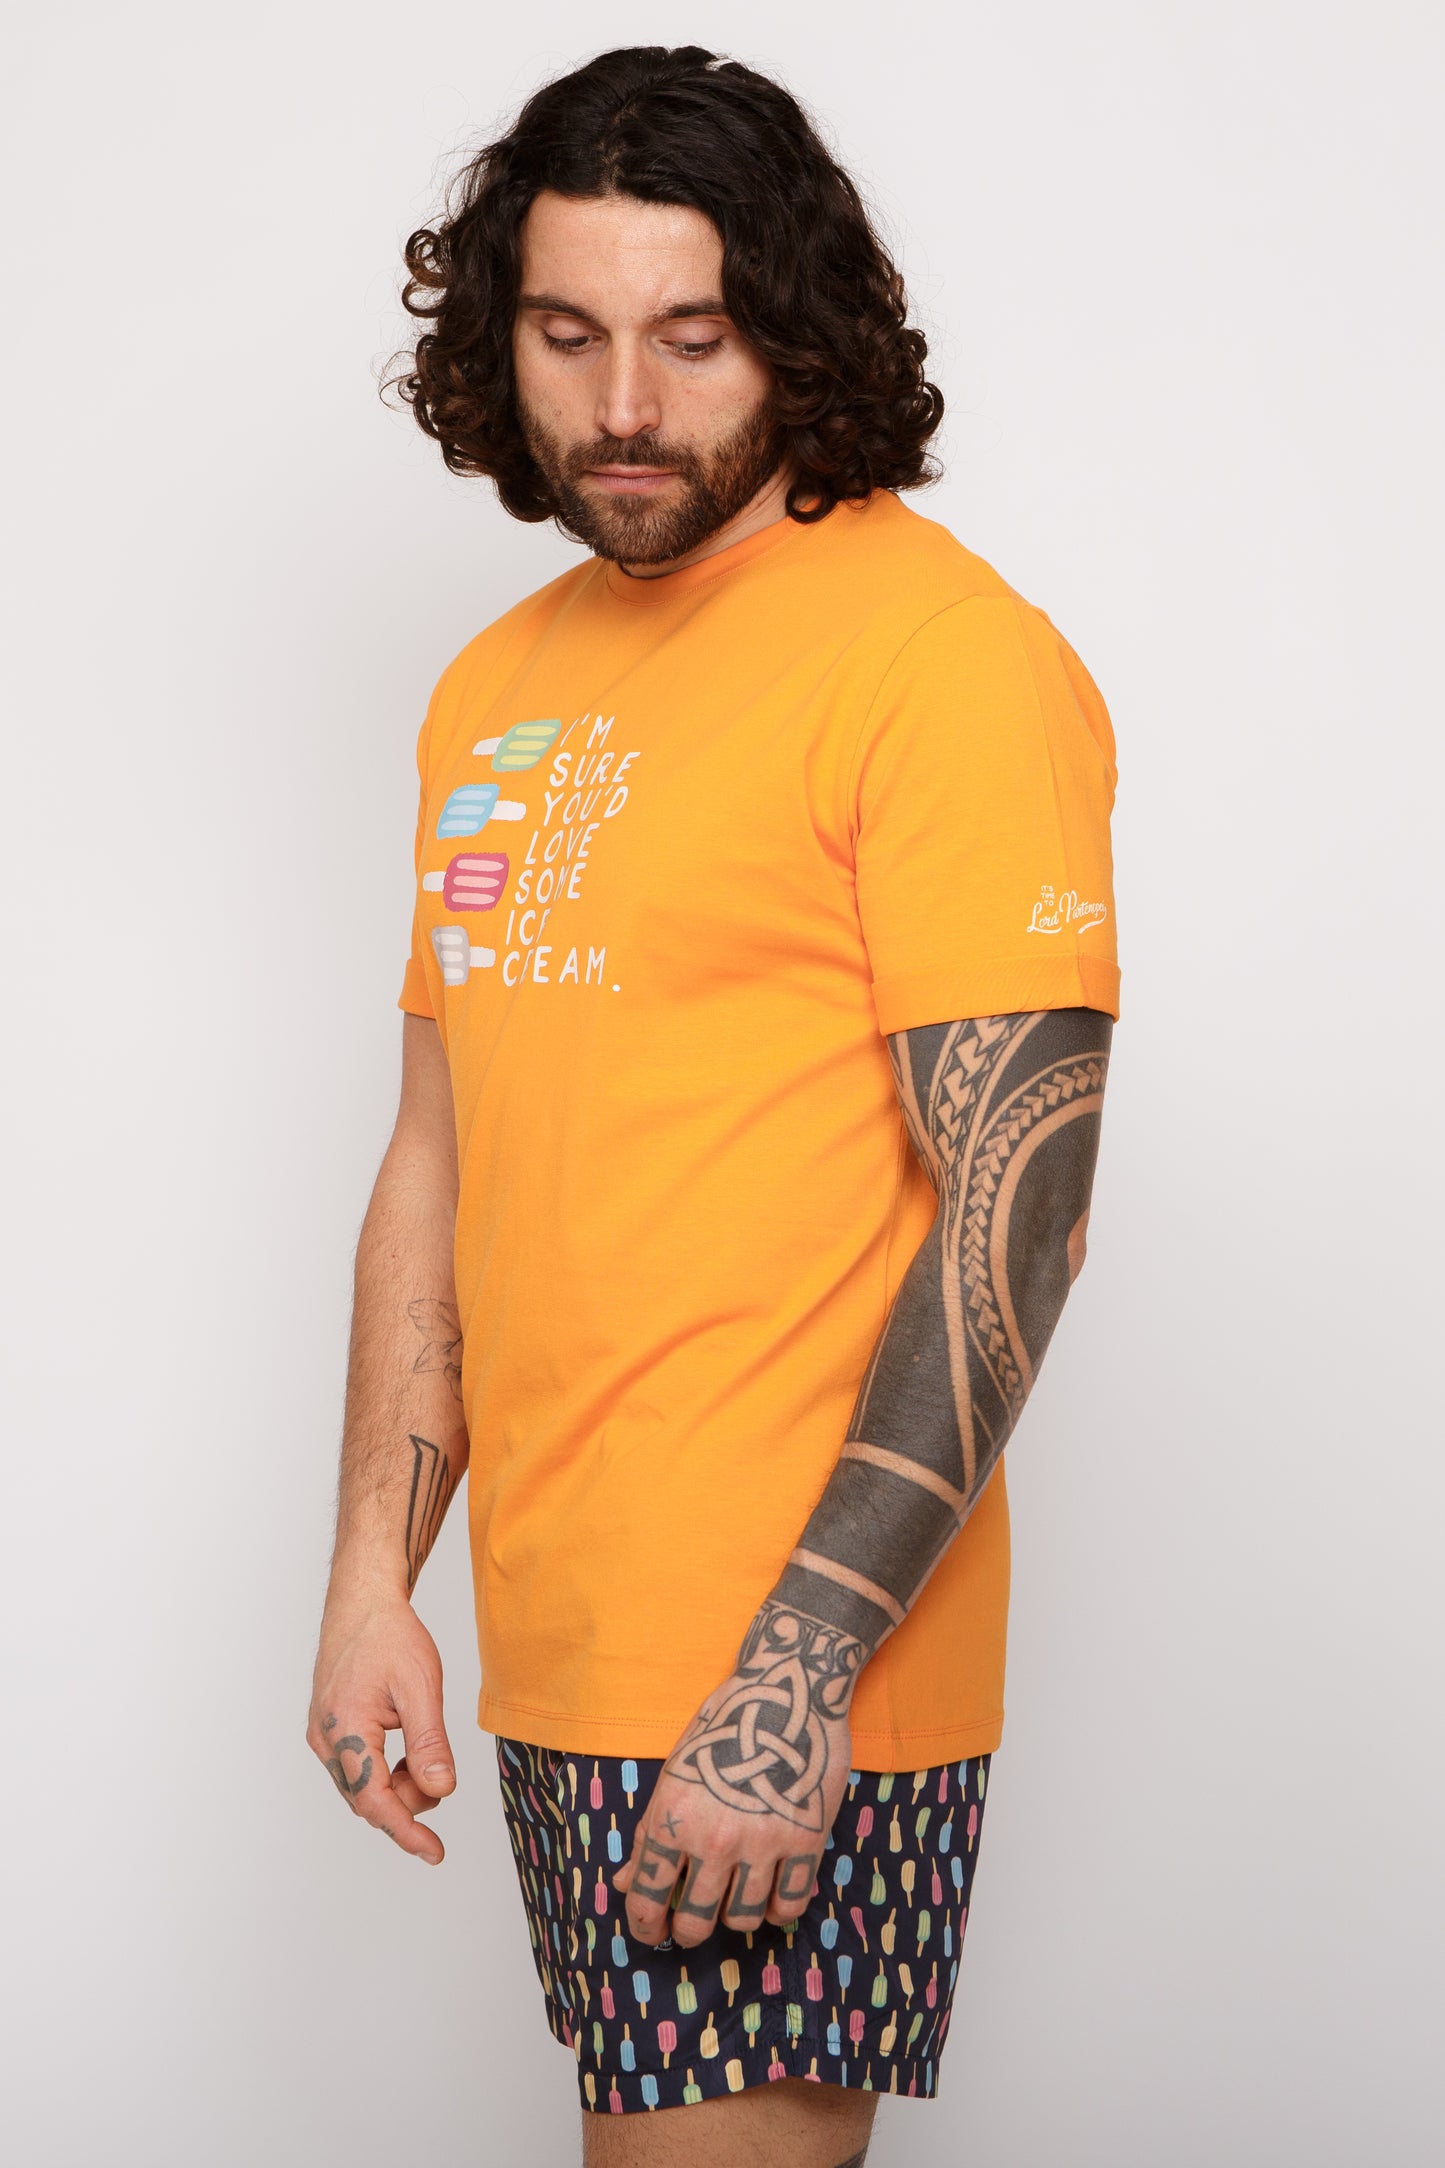 Icelolly - T-shirt arancio stampa icelolly